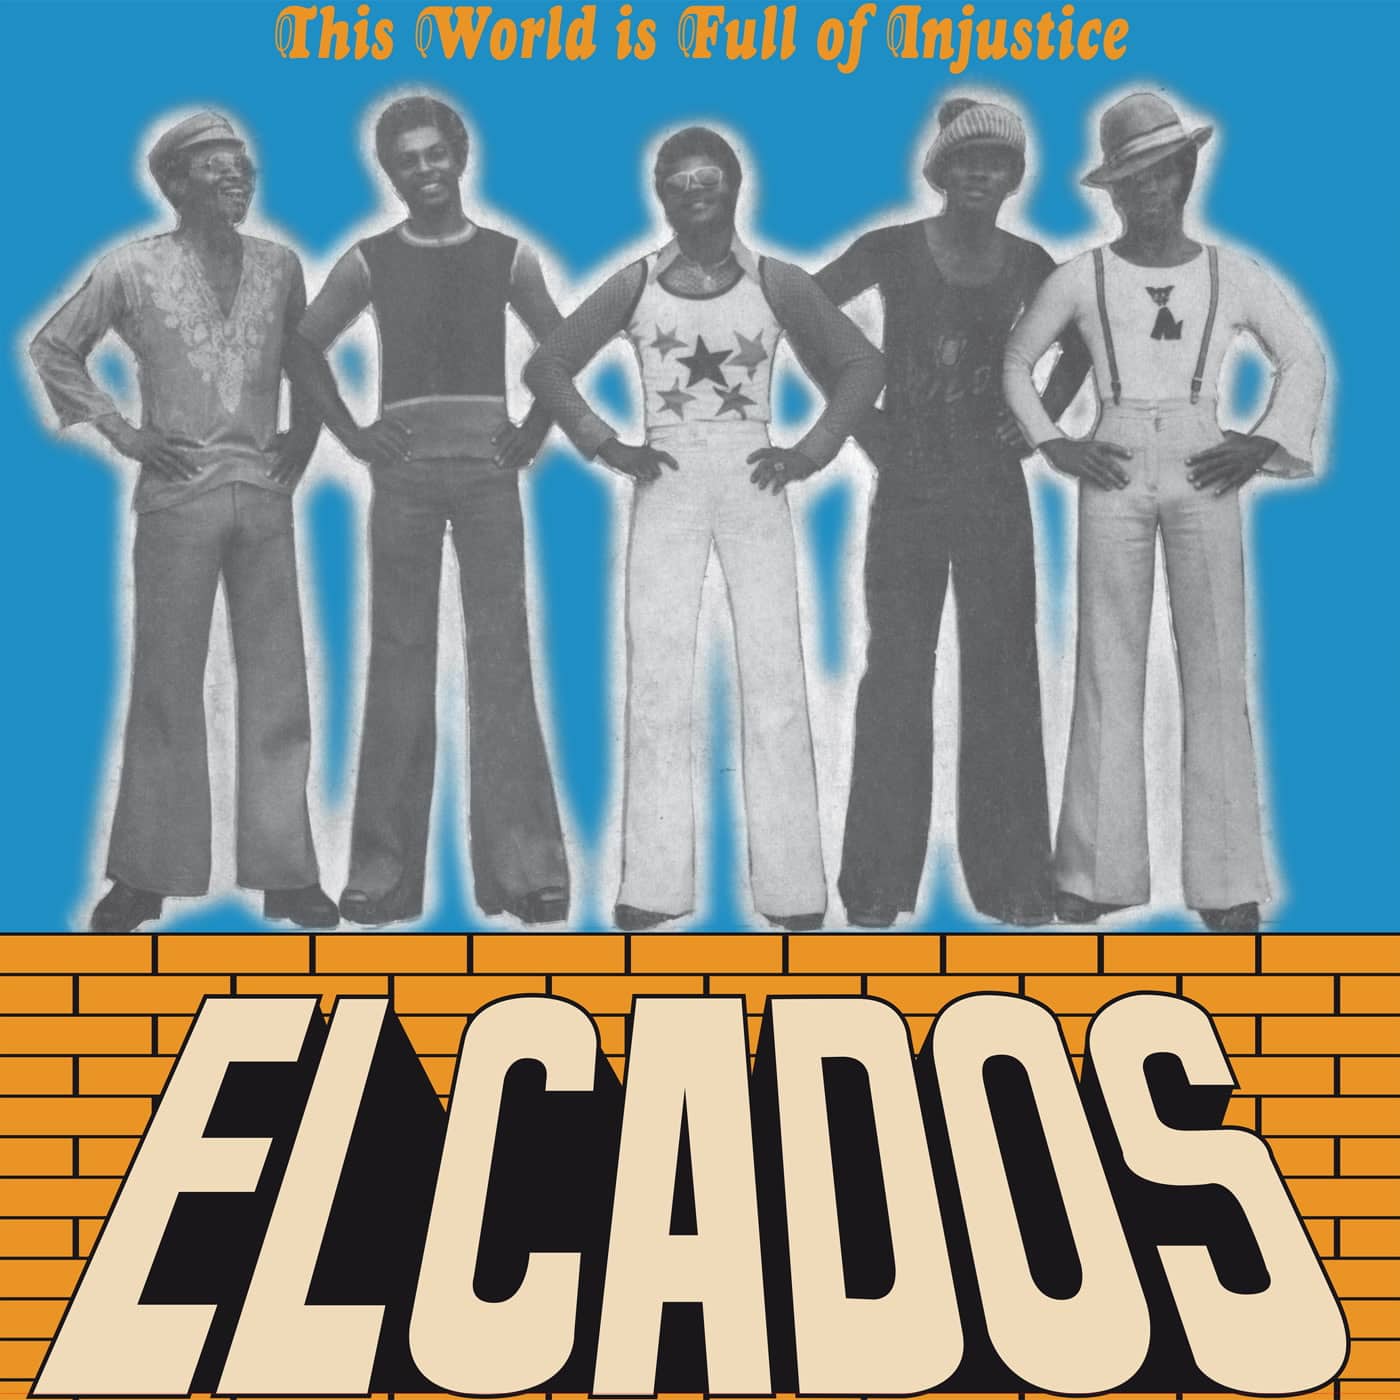 Elcados - I Was Stunned Into Speechlessness